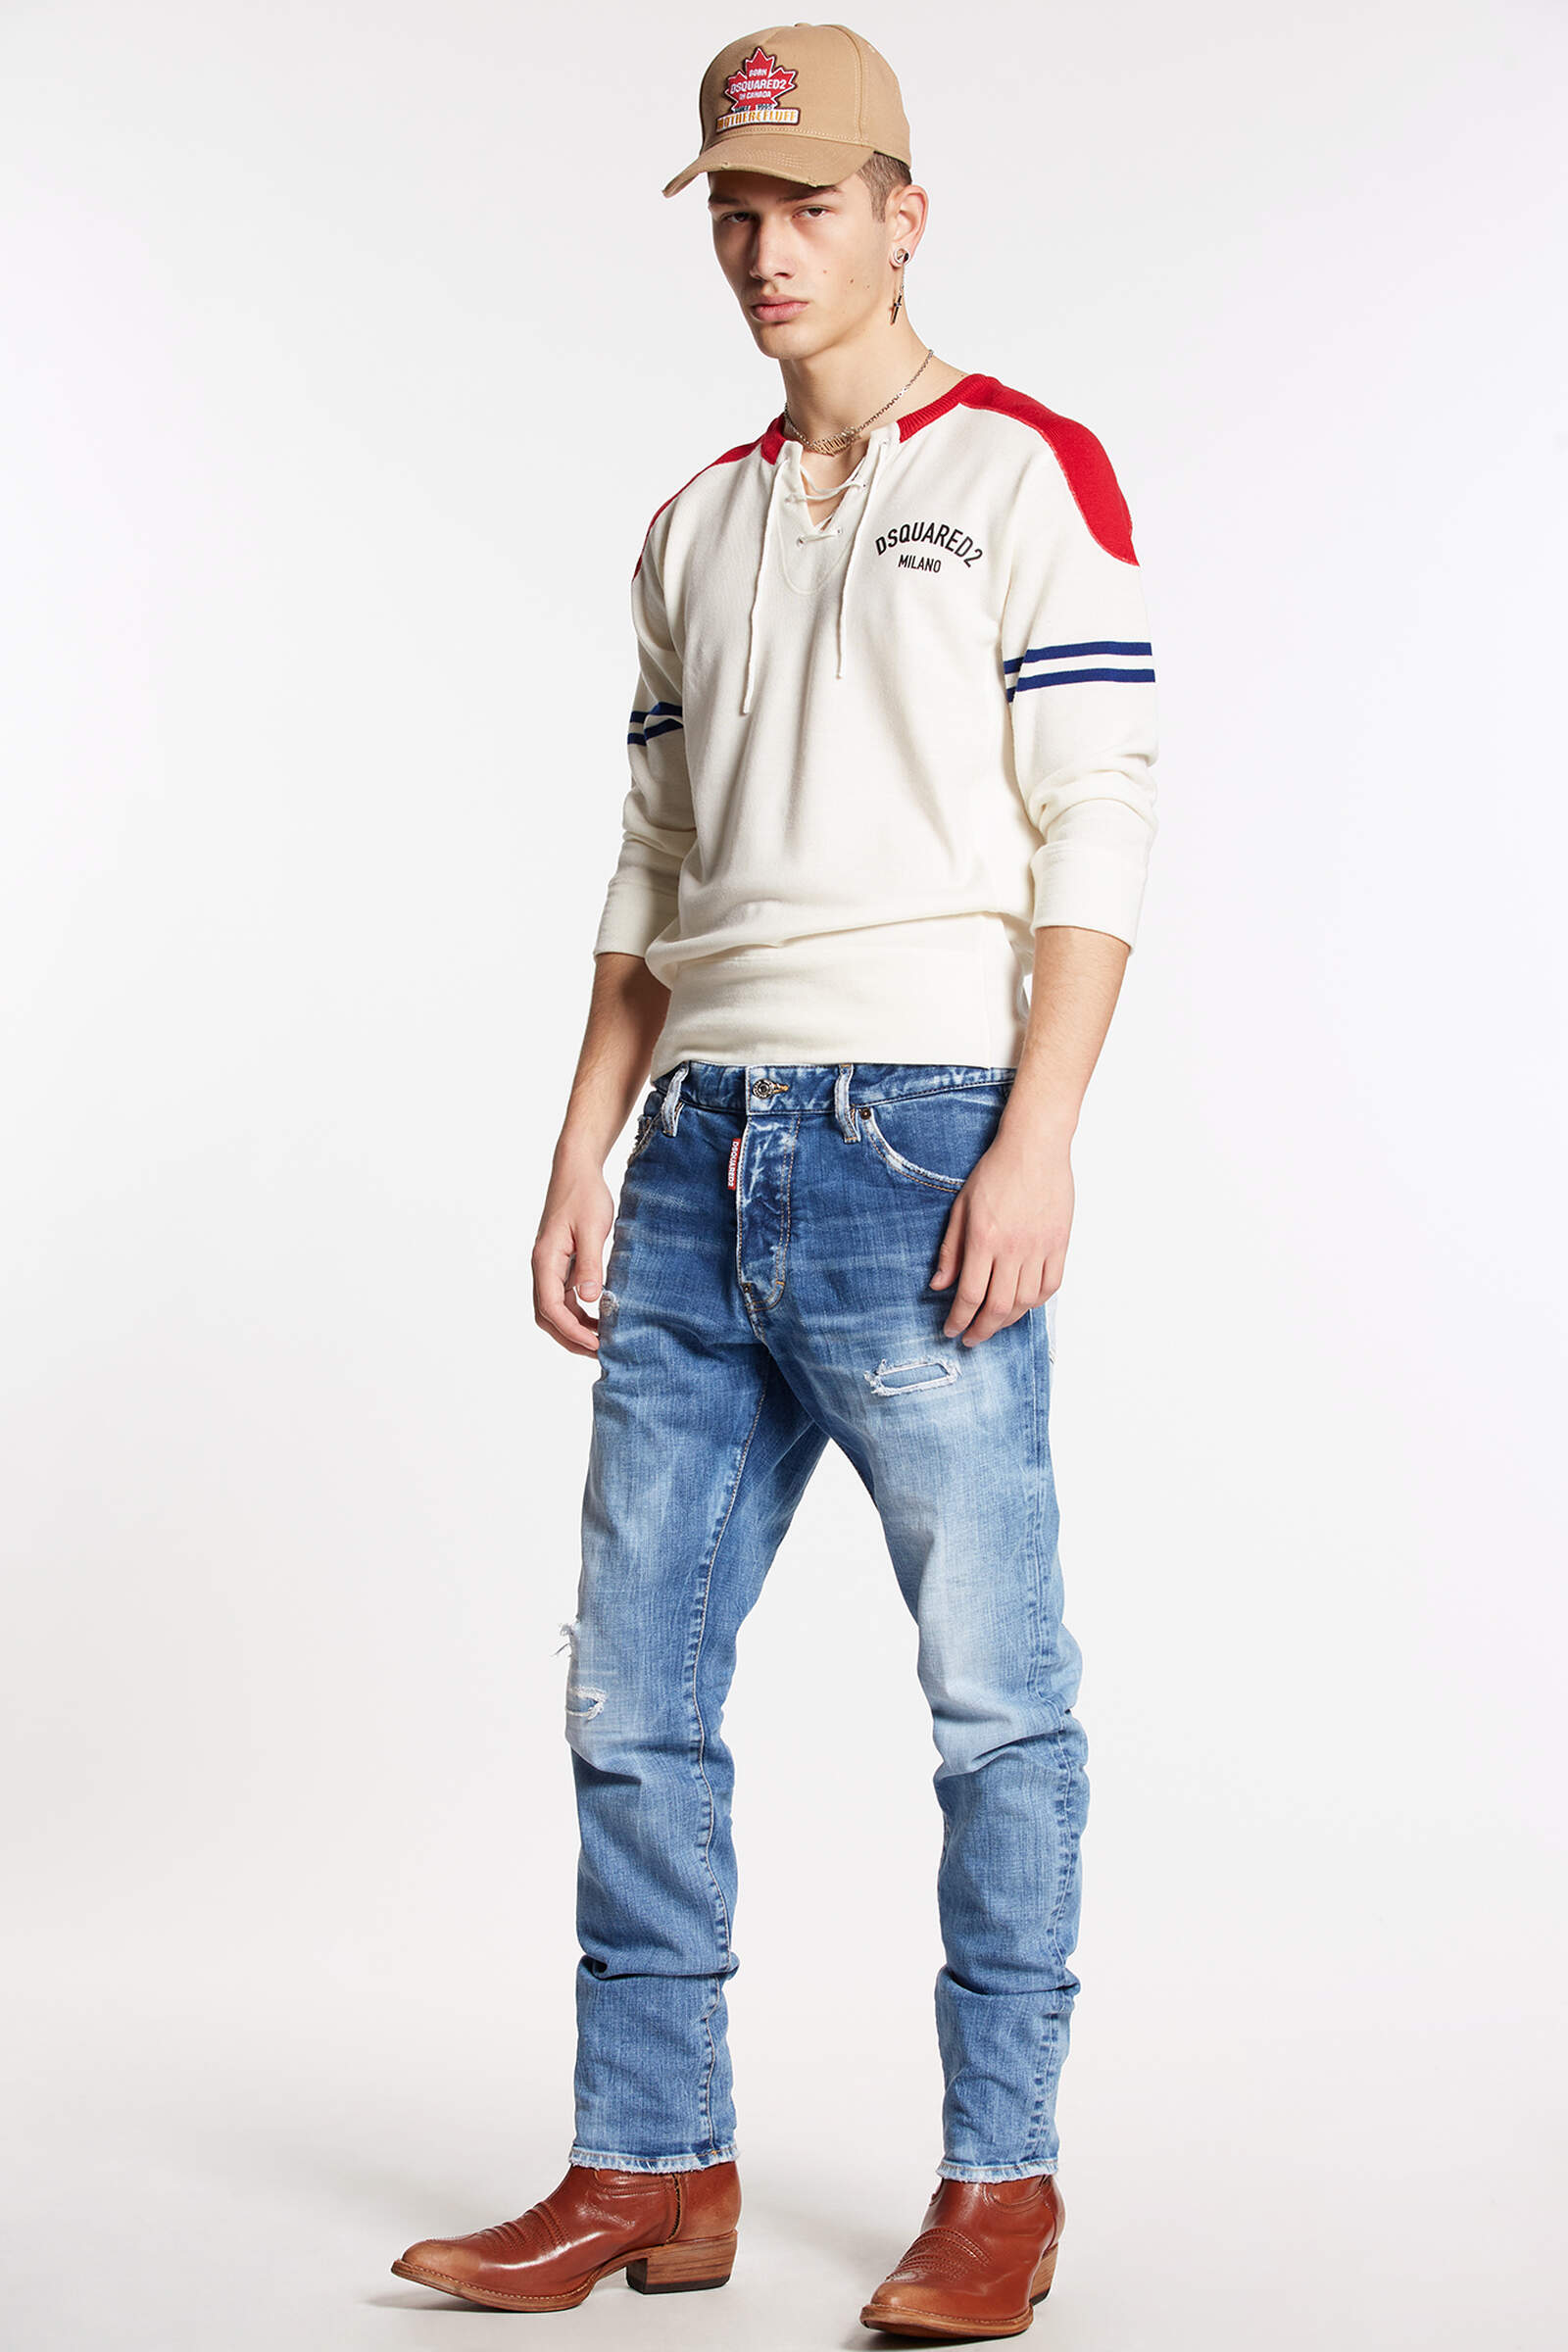 DSQUARED2 Cool Guy Jeans in Light Blue Washing 50